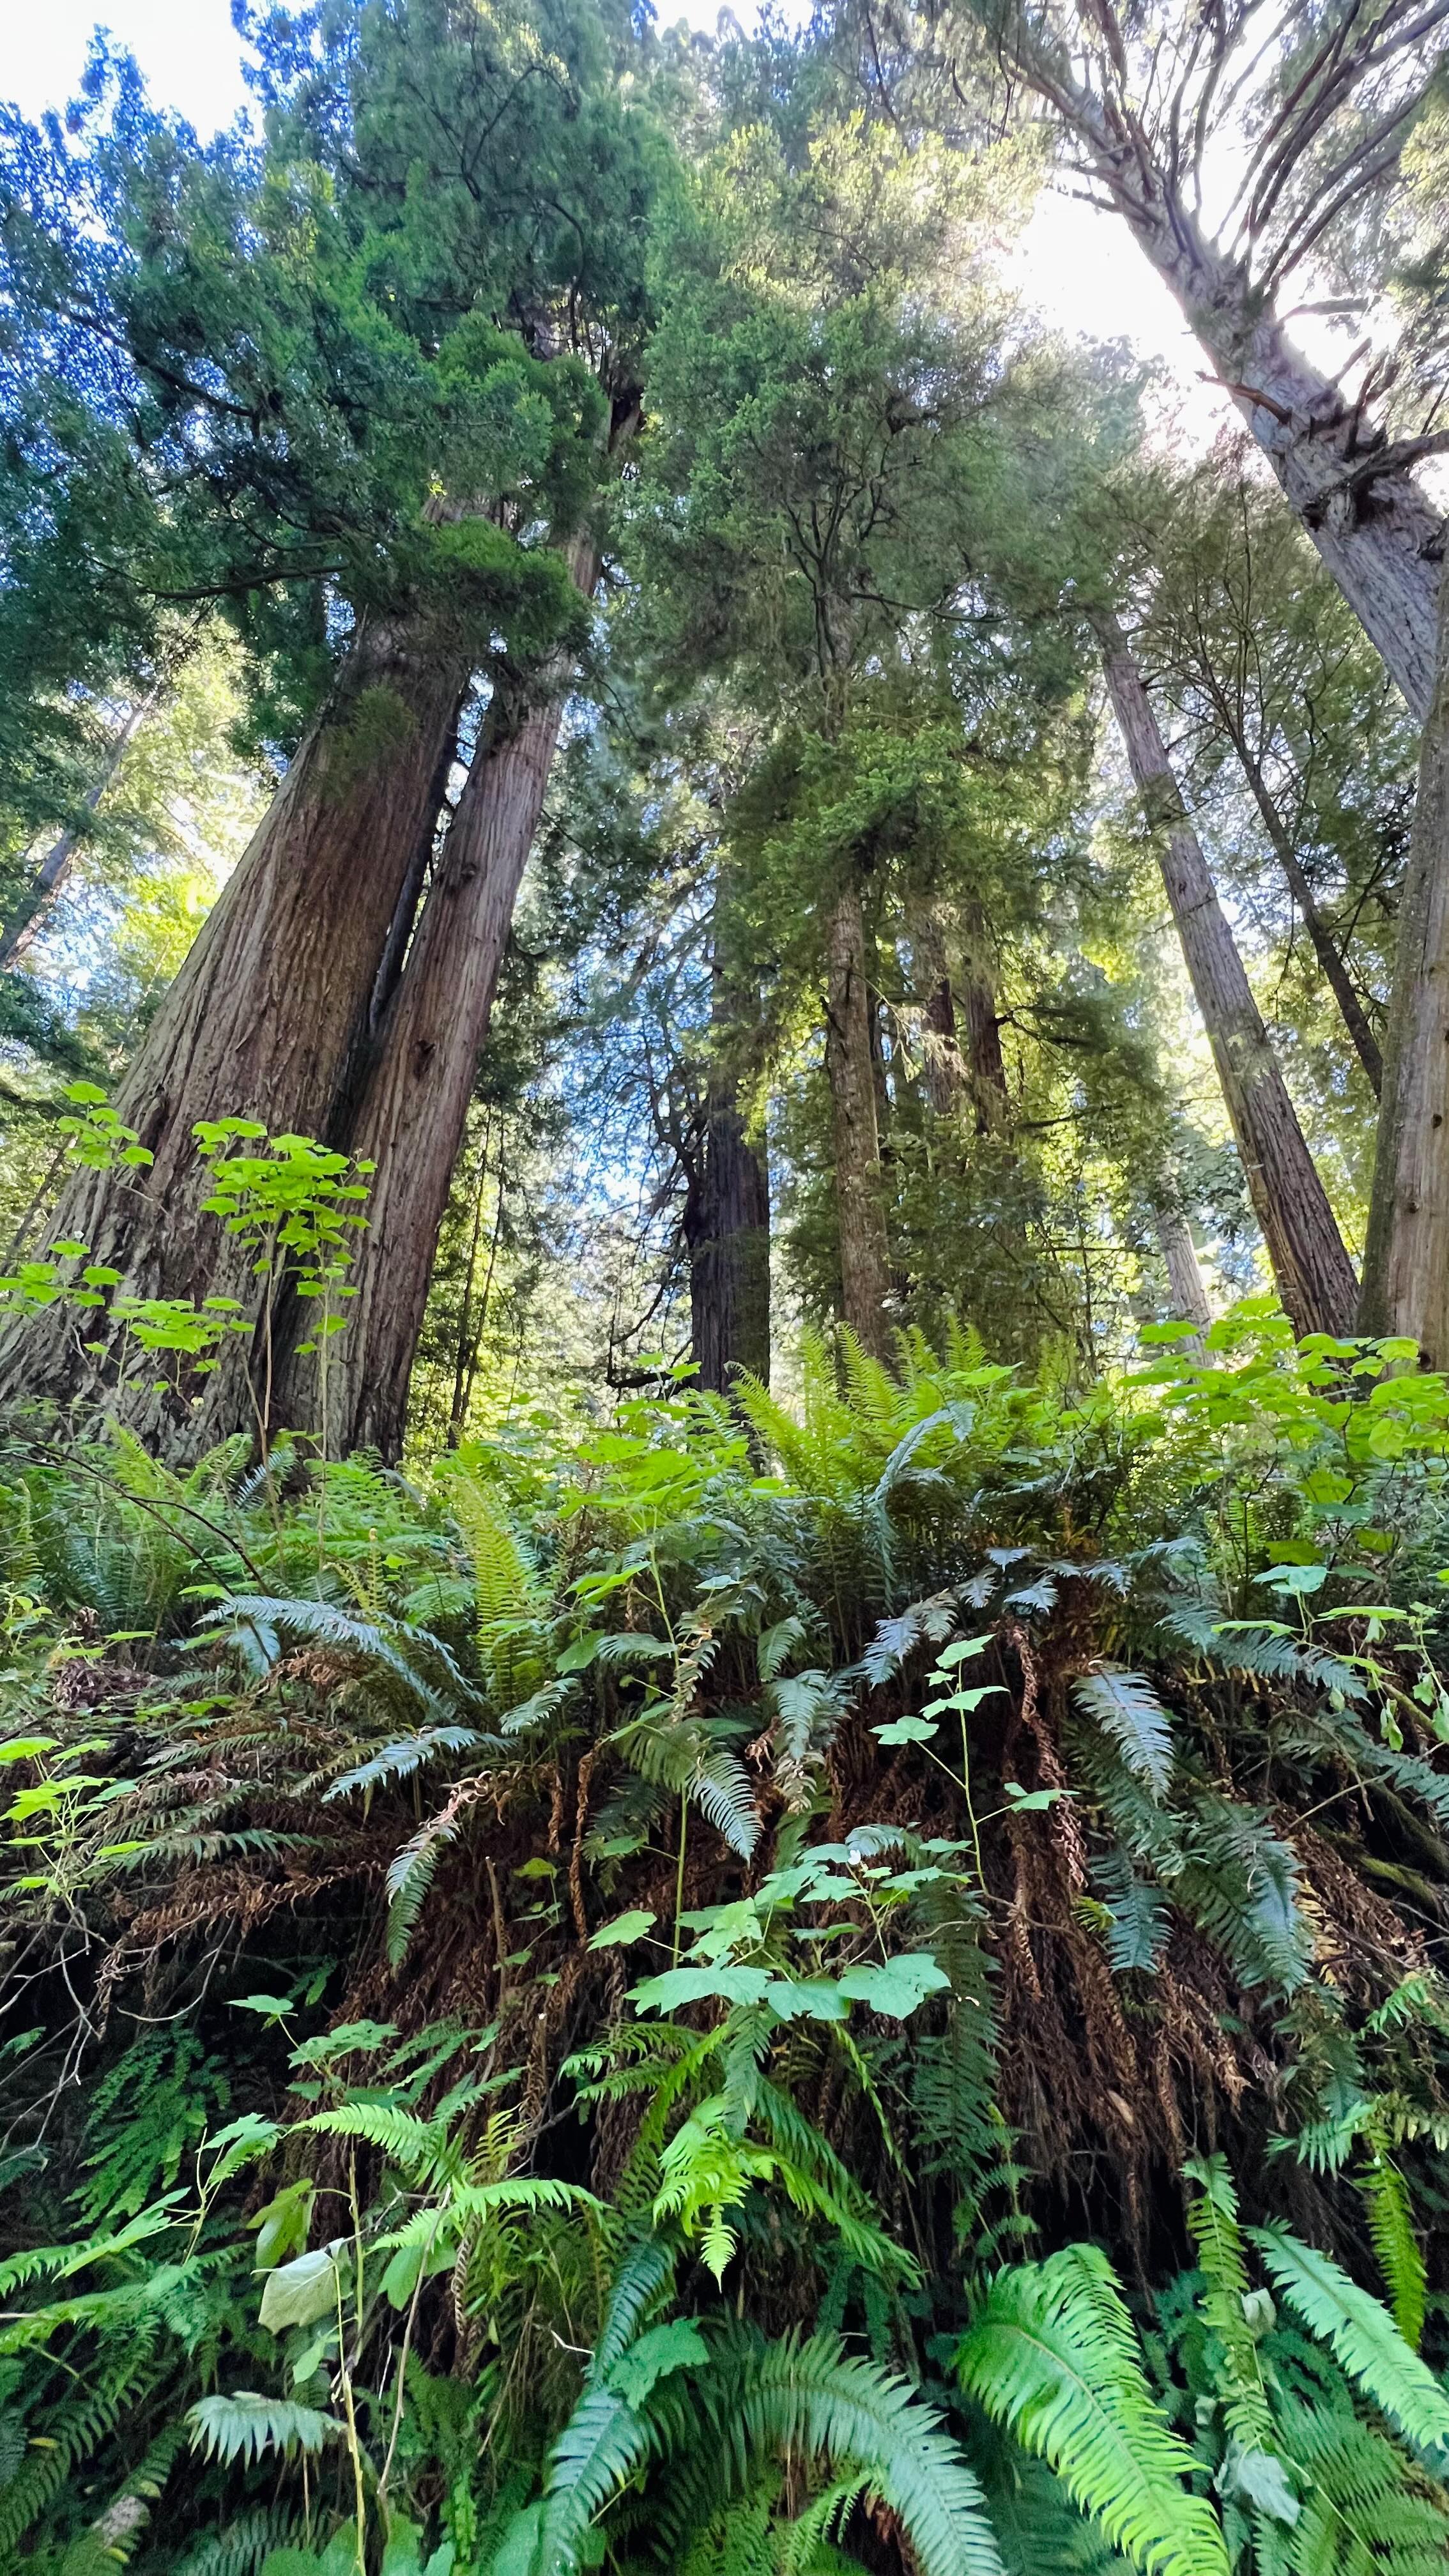 Towering trees in a lush green forest 🌿 If you’re interested in seeing old-growth redwoods, you’ll love this spot in Northern California! 
.
.
#california #redwoods #californication #nature #treehugger #traveltips #hike #roadtrip #pnw #explore #usa #instatravel #reizen #camperlife #reistypje